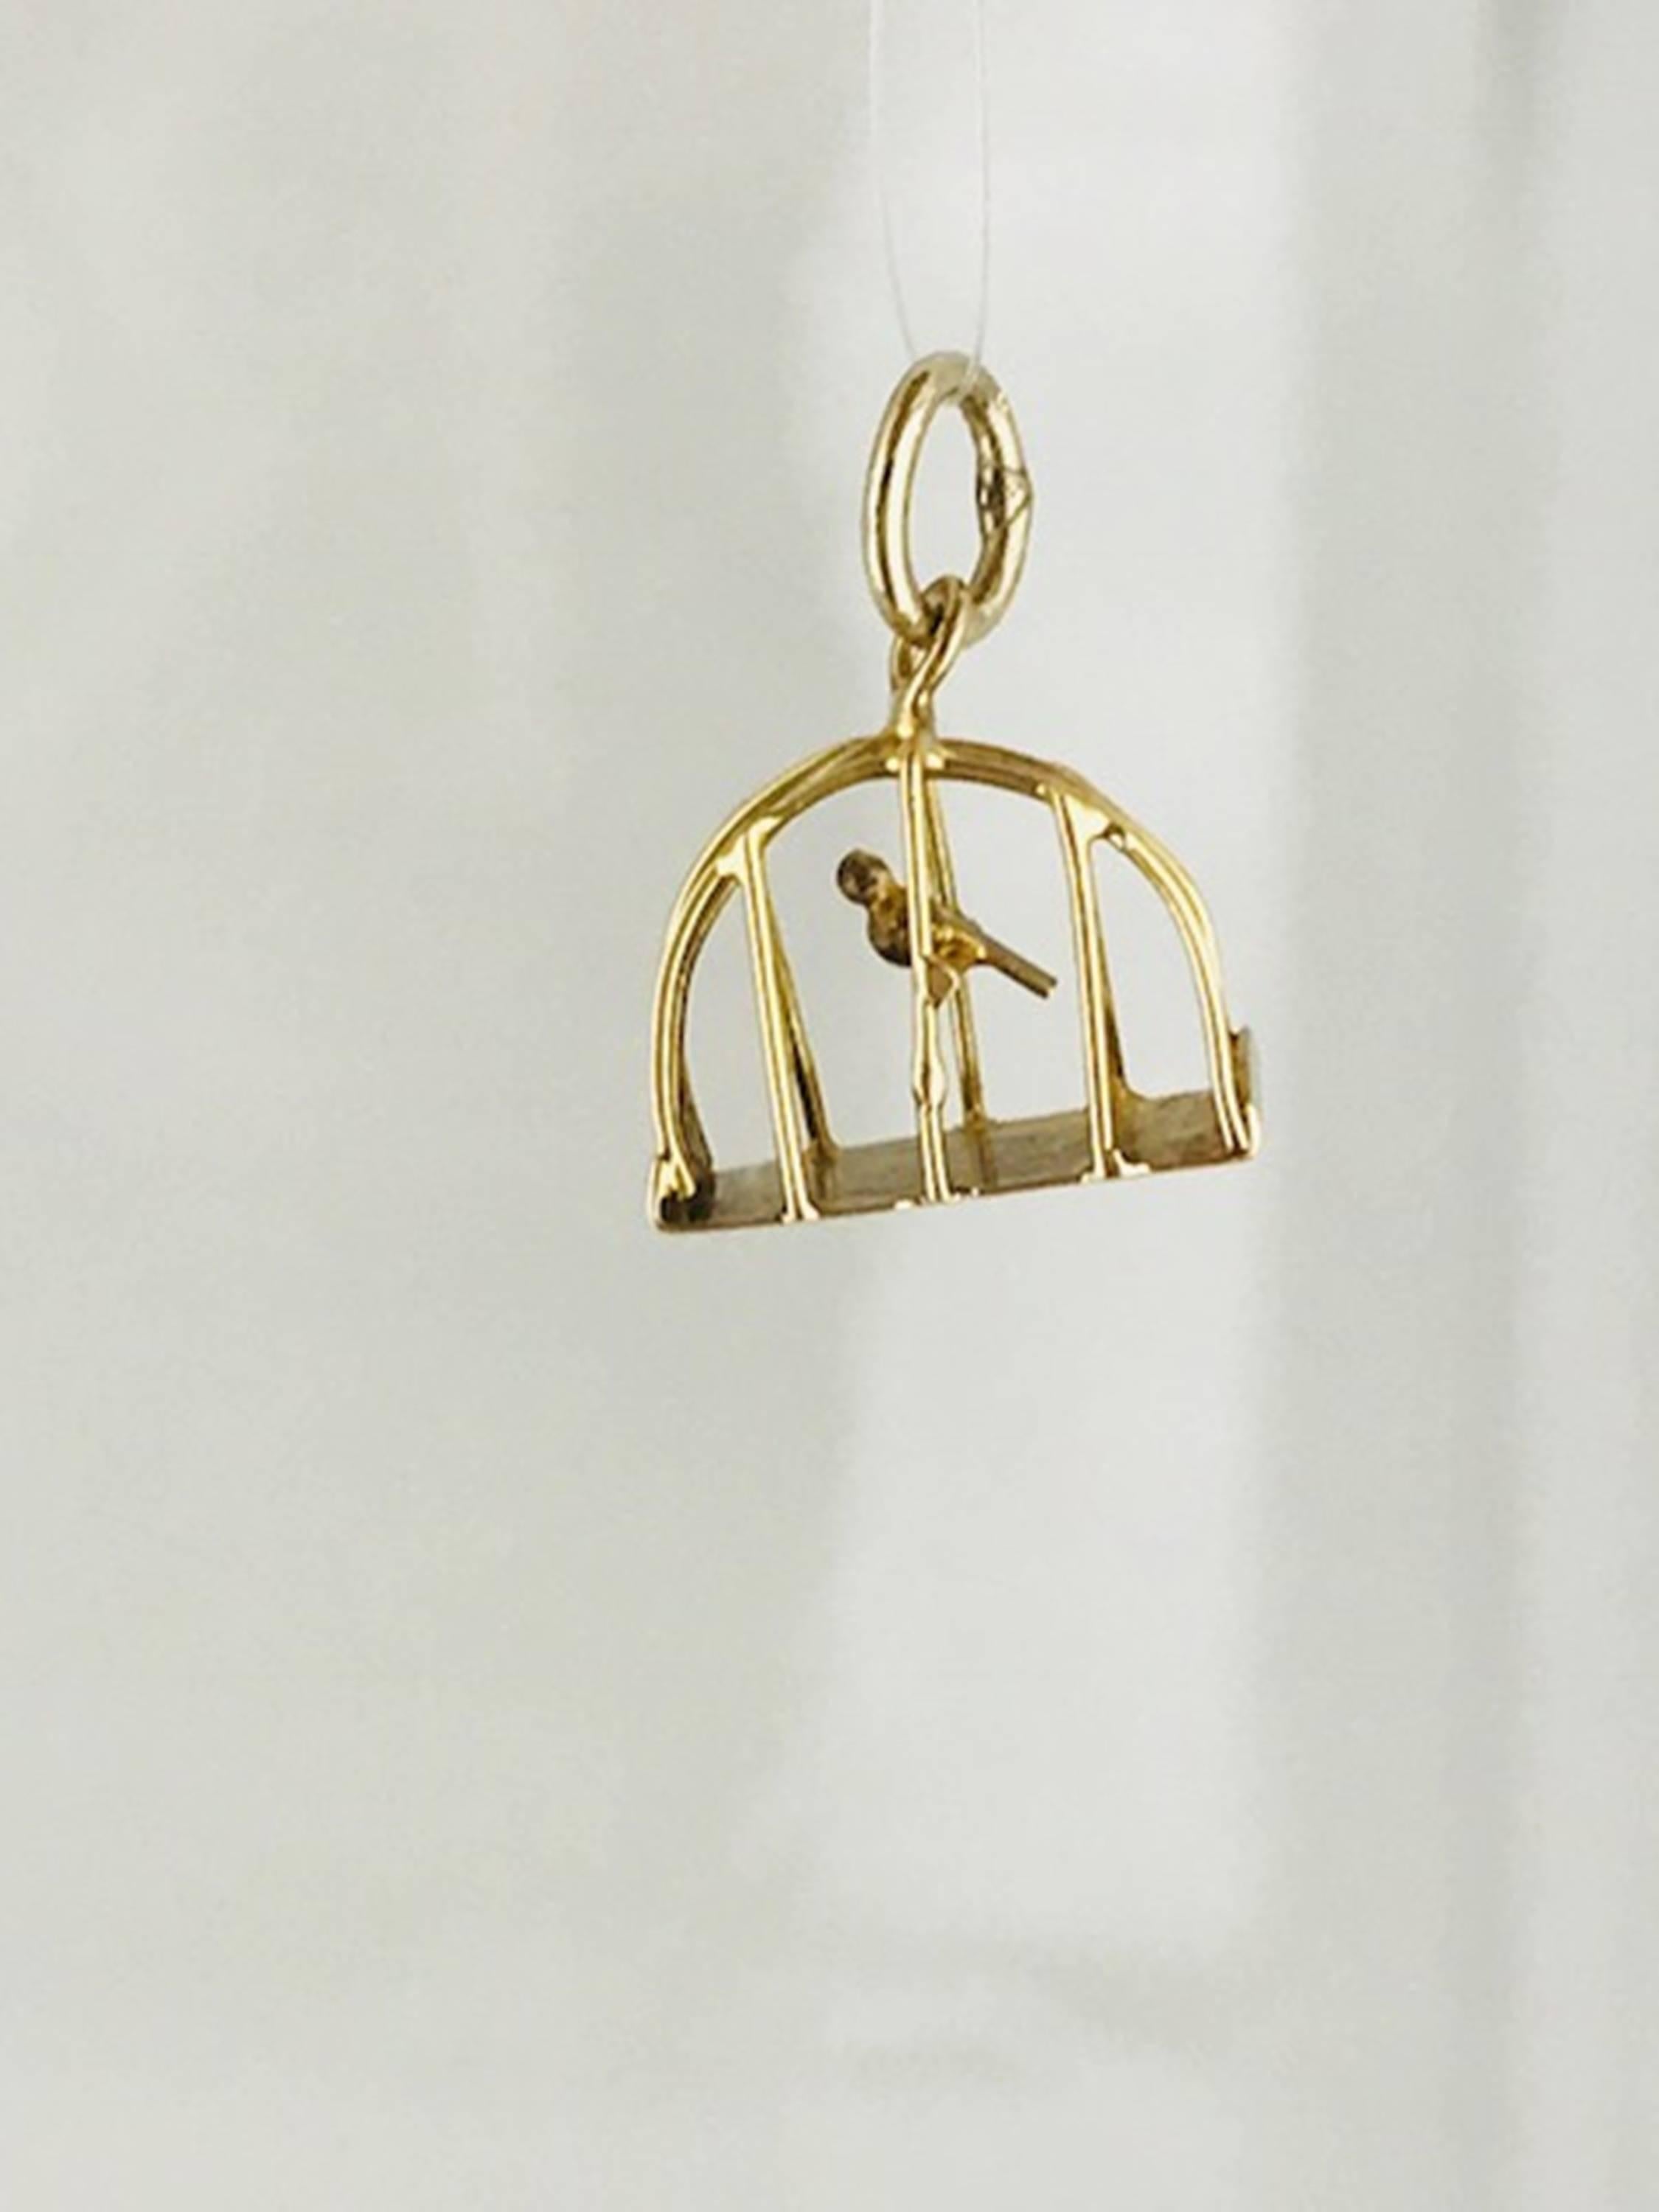 Bird in a Cage Charm, Handmade, circa 1950, 14 Karat Yellow Gold In Excellent Condition For Sale In Aliso Viejo, CA